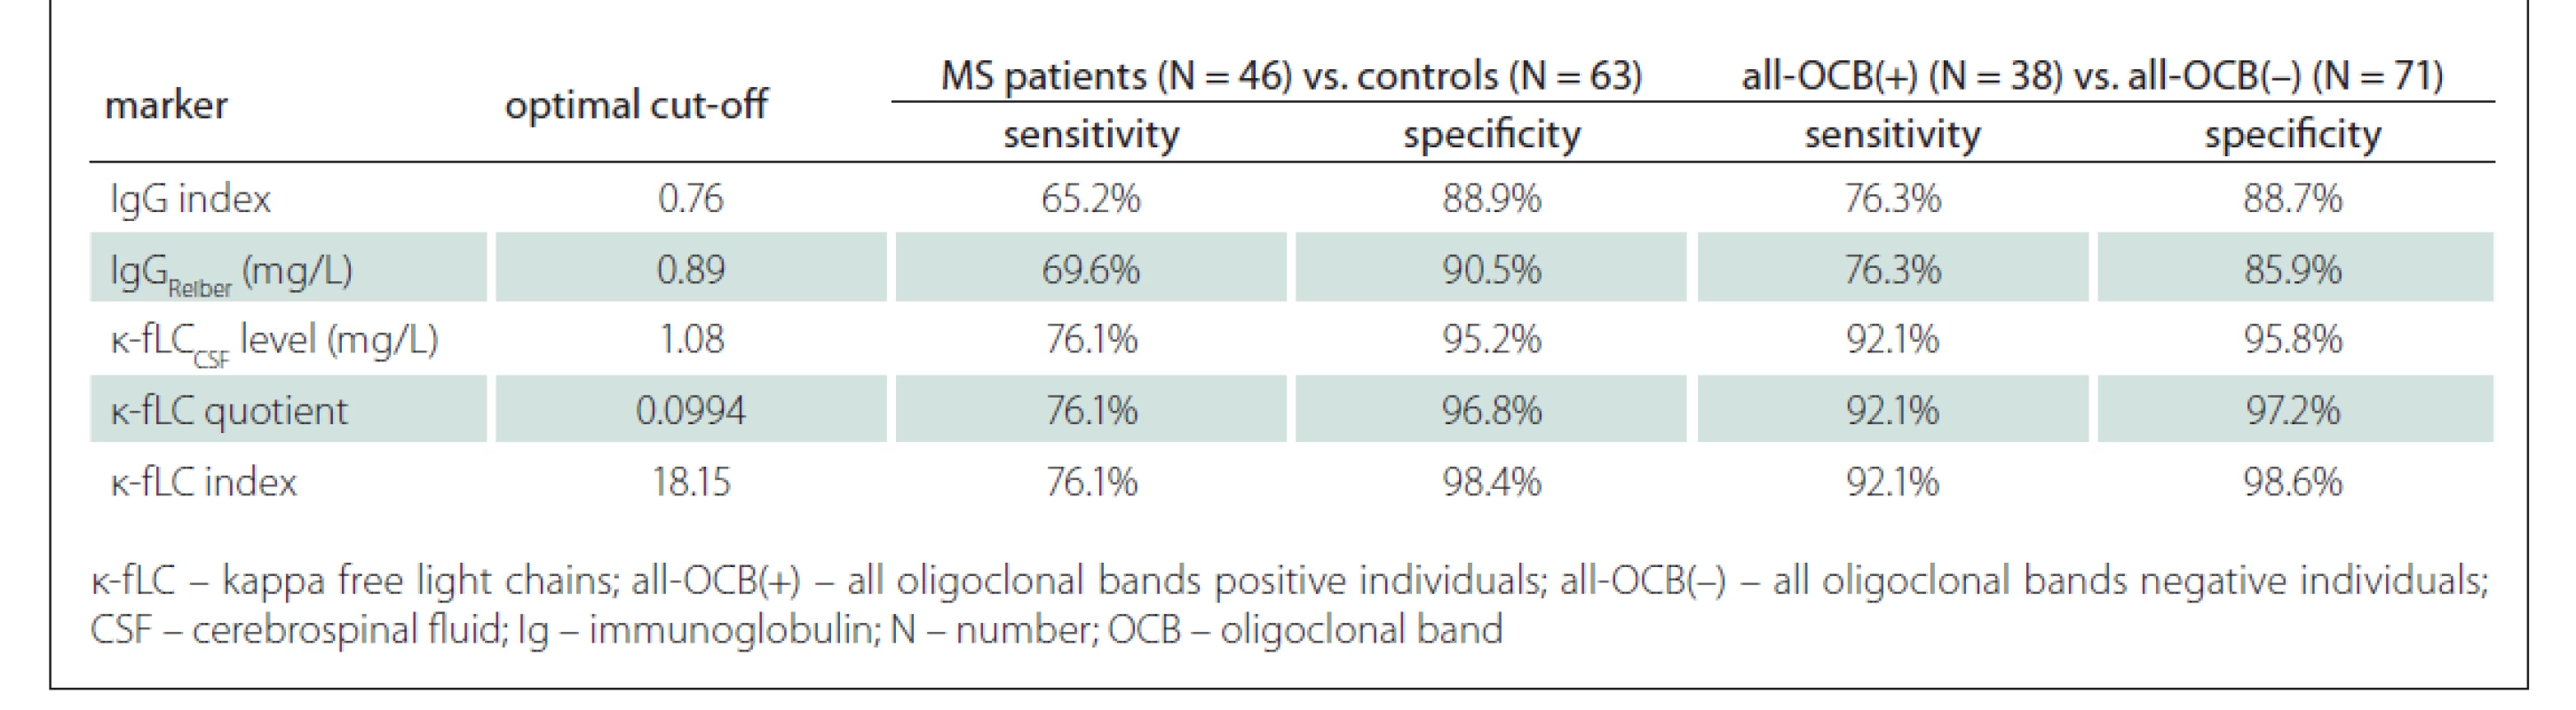 Applicability of markers cut-off s in MS diagnostics and in the prediction of OCB positivity.